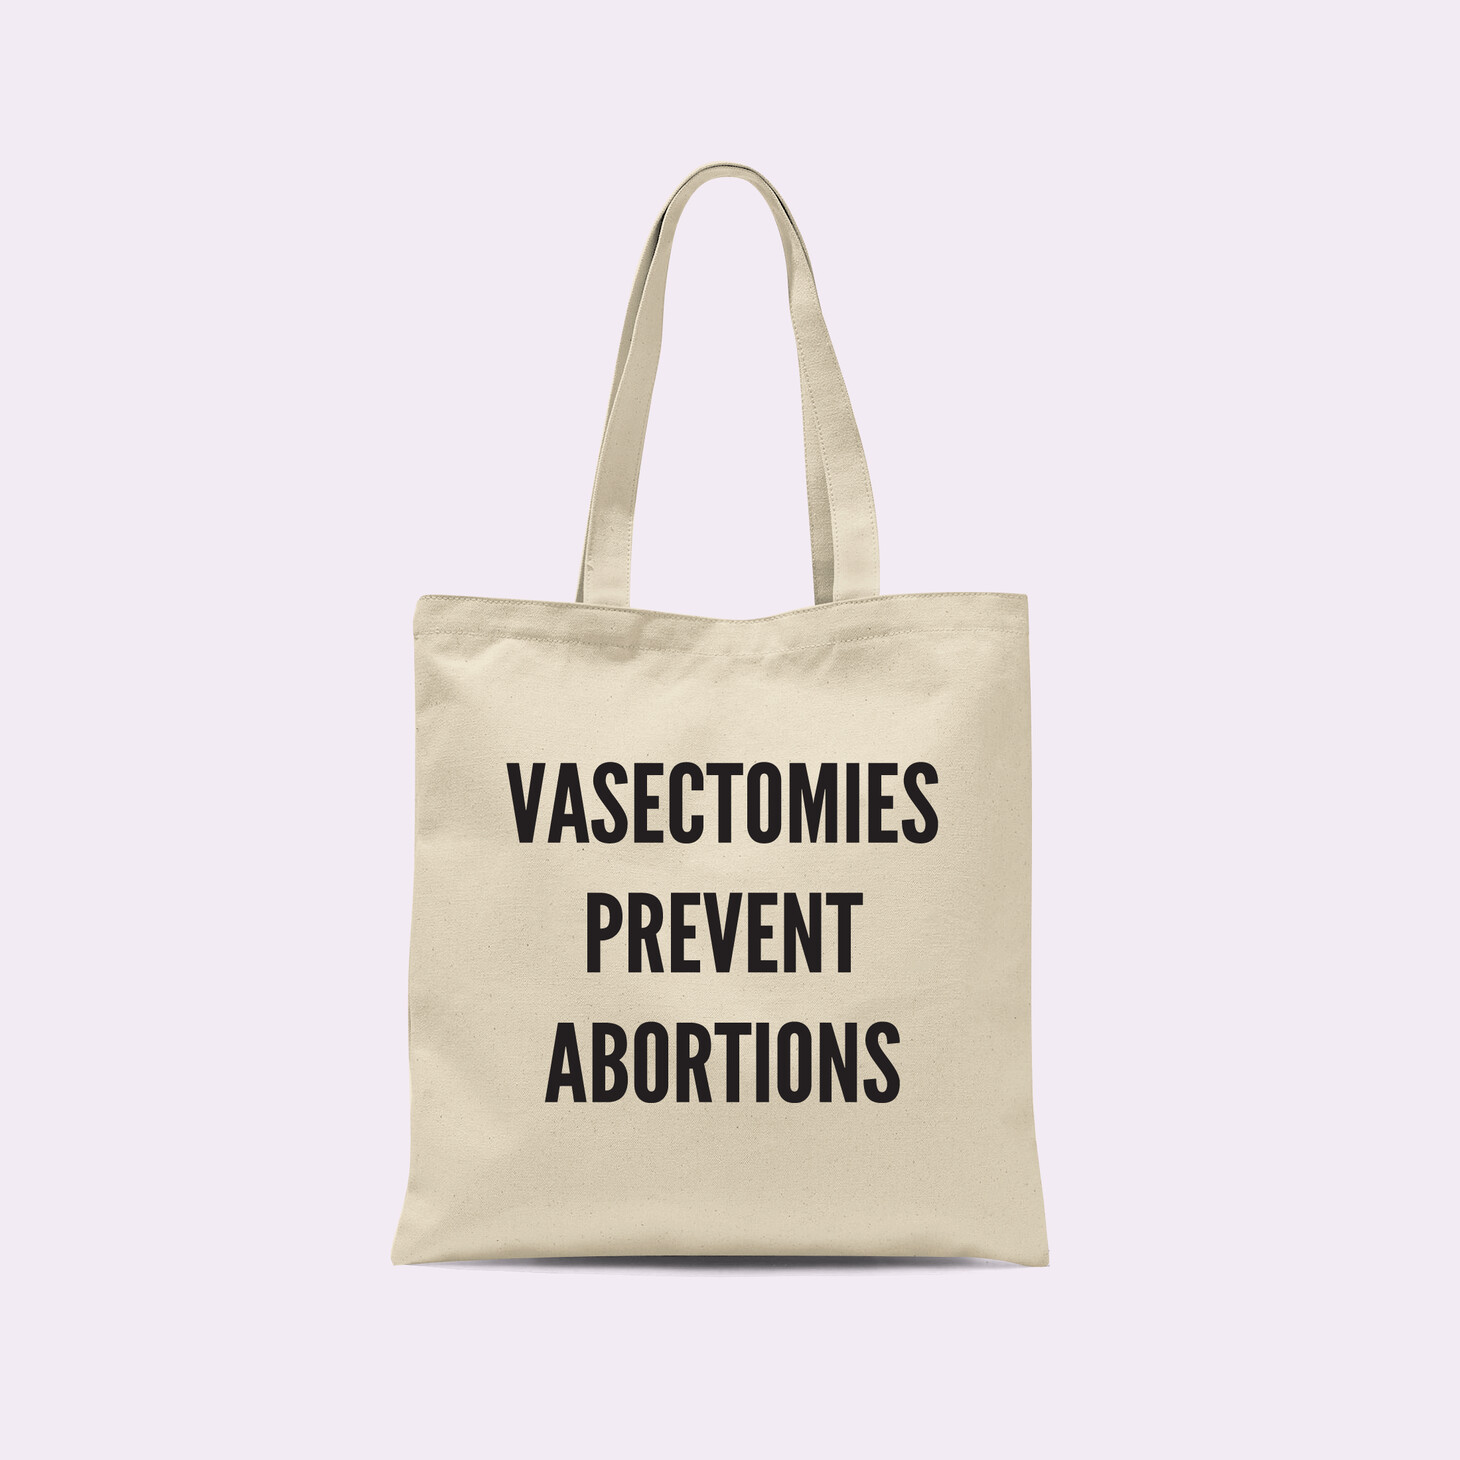 Vasectomies Prevent Abortions Tote Bag